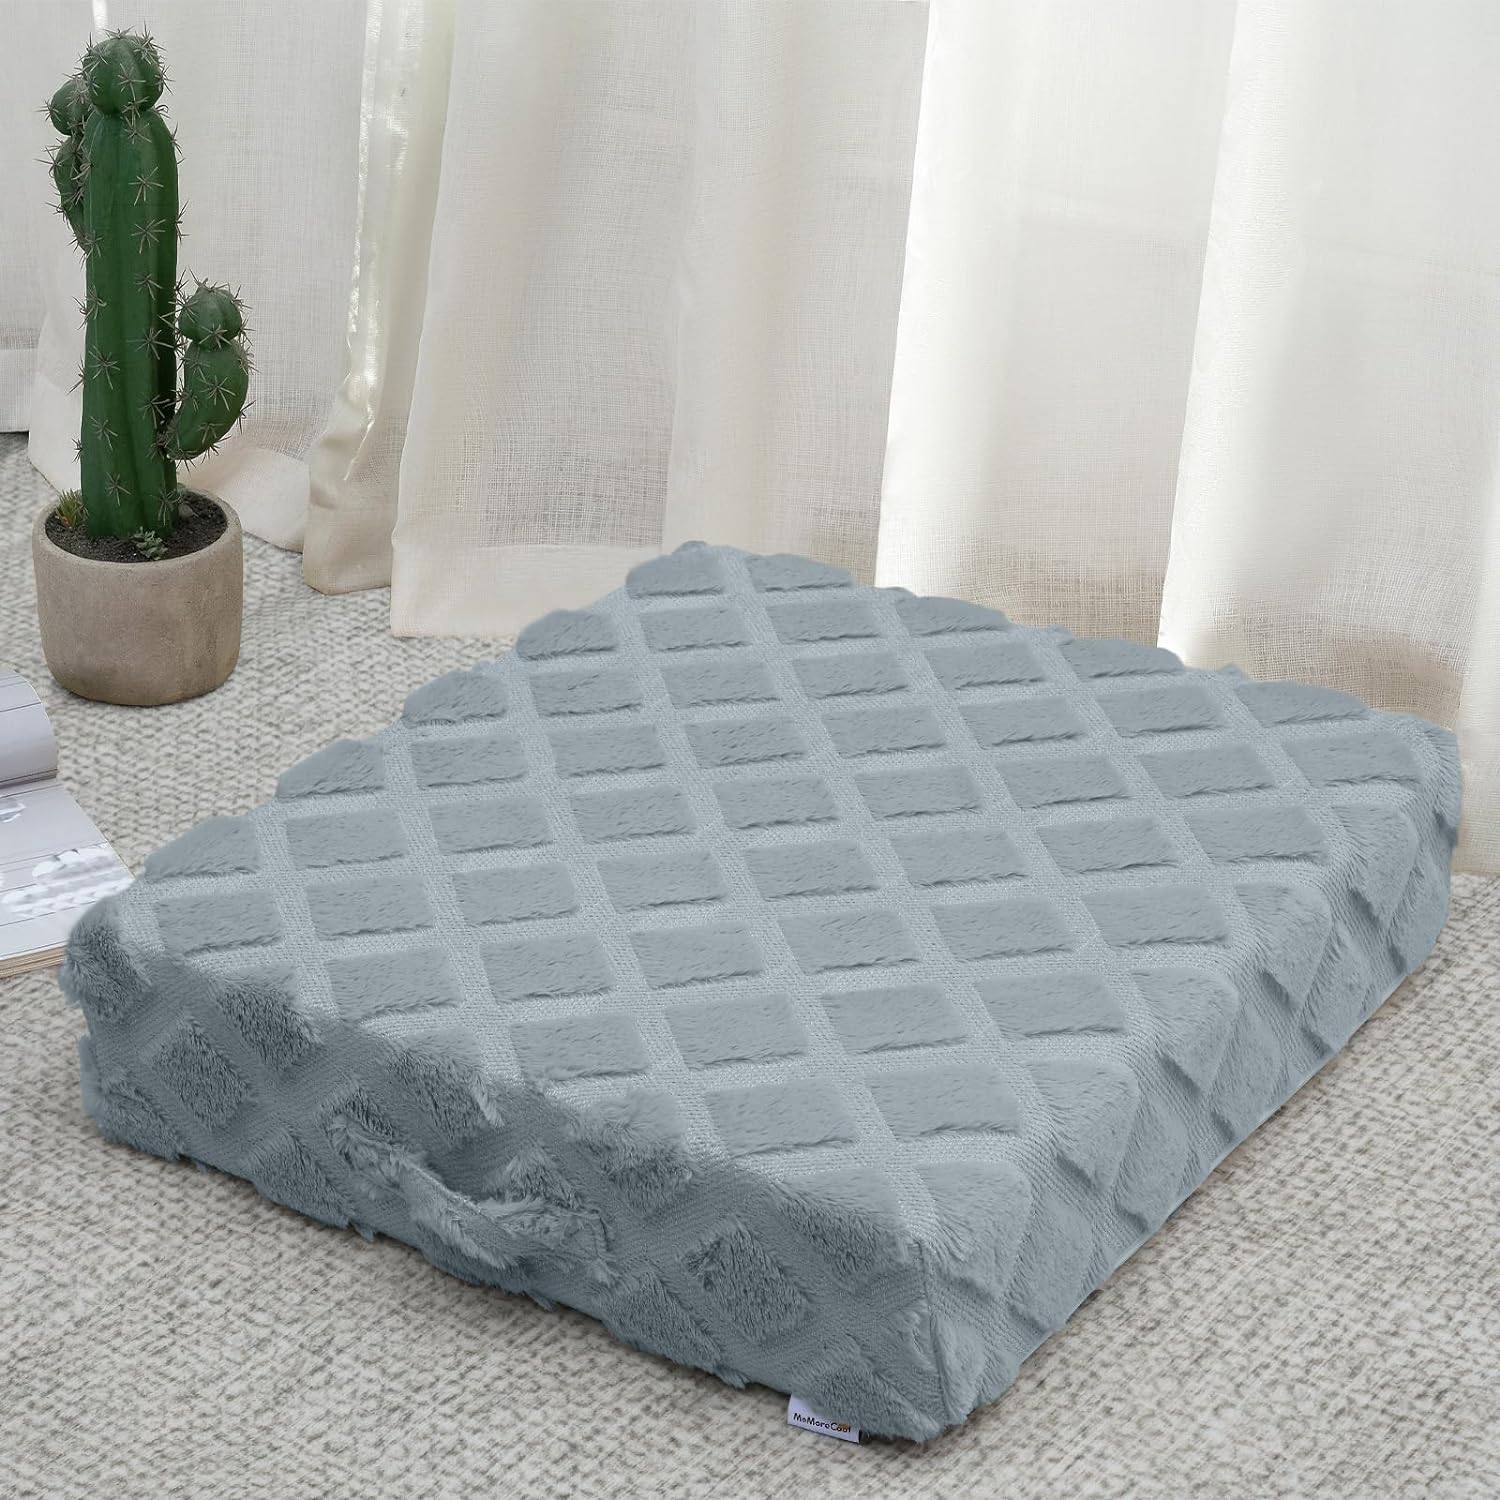 MeMoreCool Square Floor Pillow for Adults Kids, Large Floor Cushion for Sitting Yoga, Big Pillow for Floor Seating, Boho Meditation Pillow Floor Seat Cushion with Thick Foam & Tufted Cover, Grey